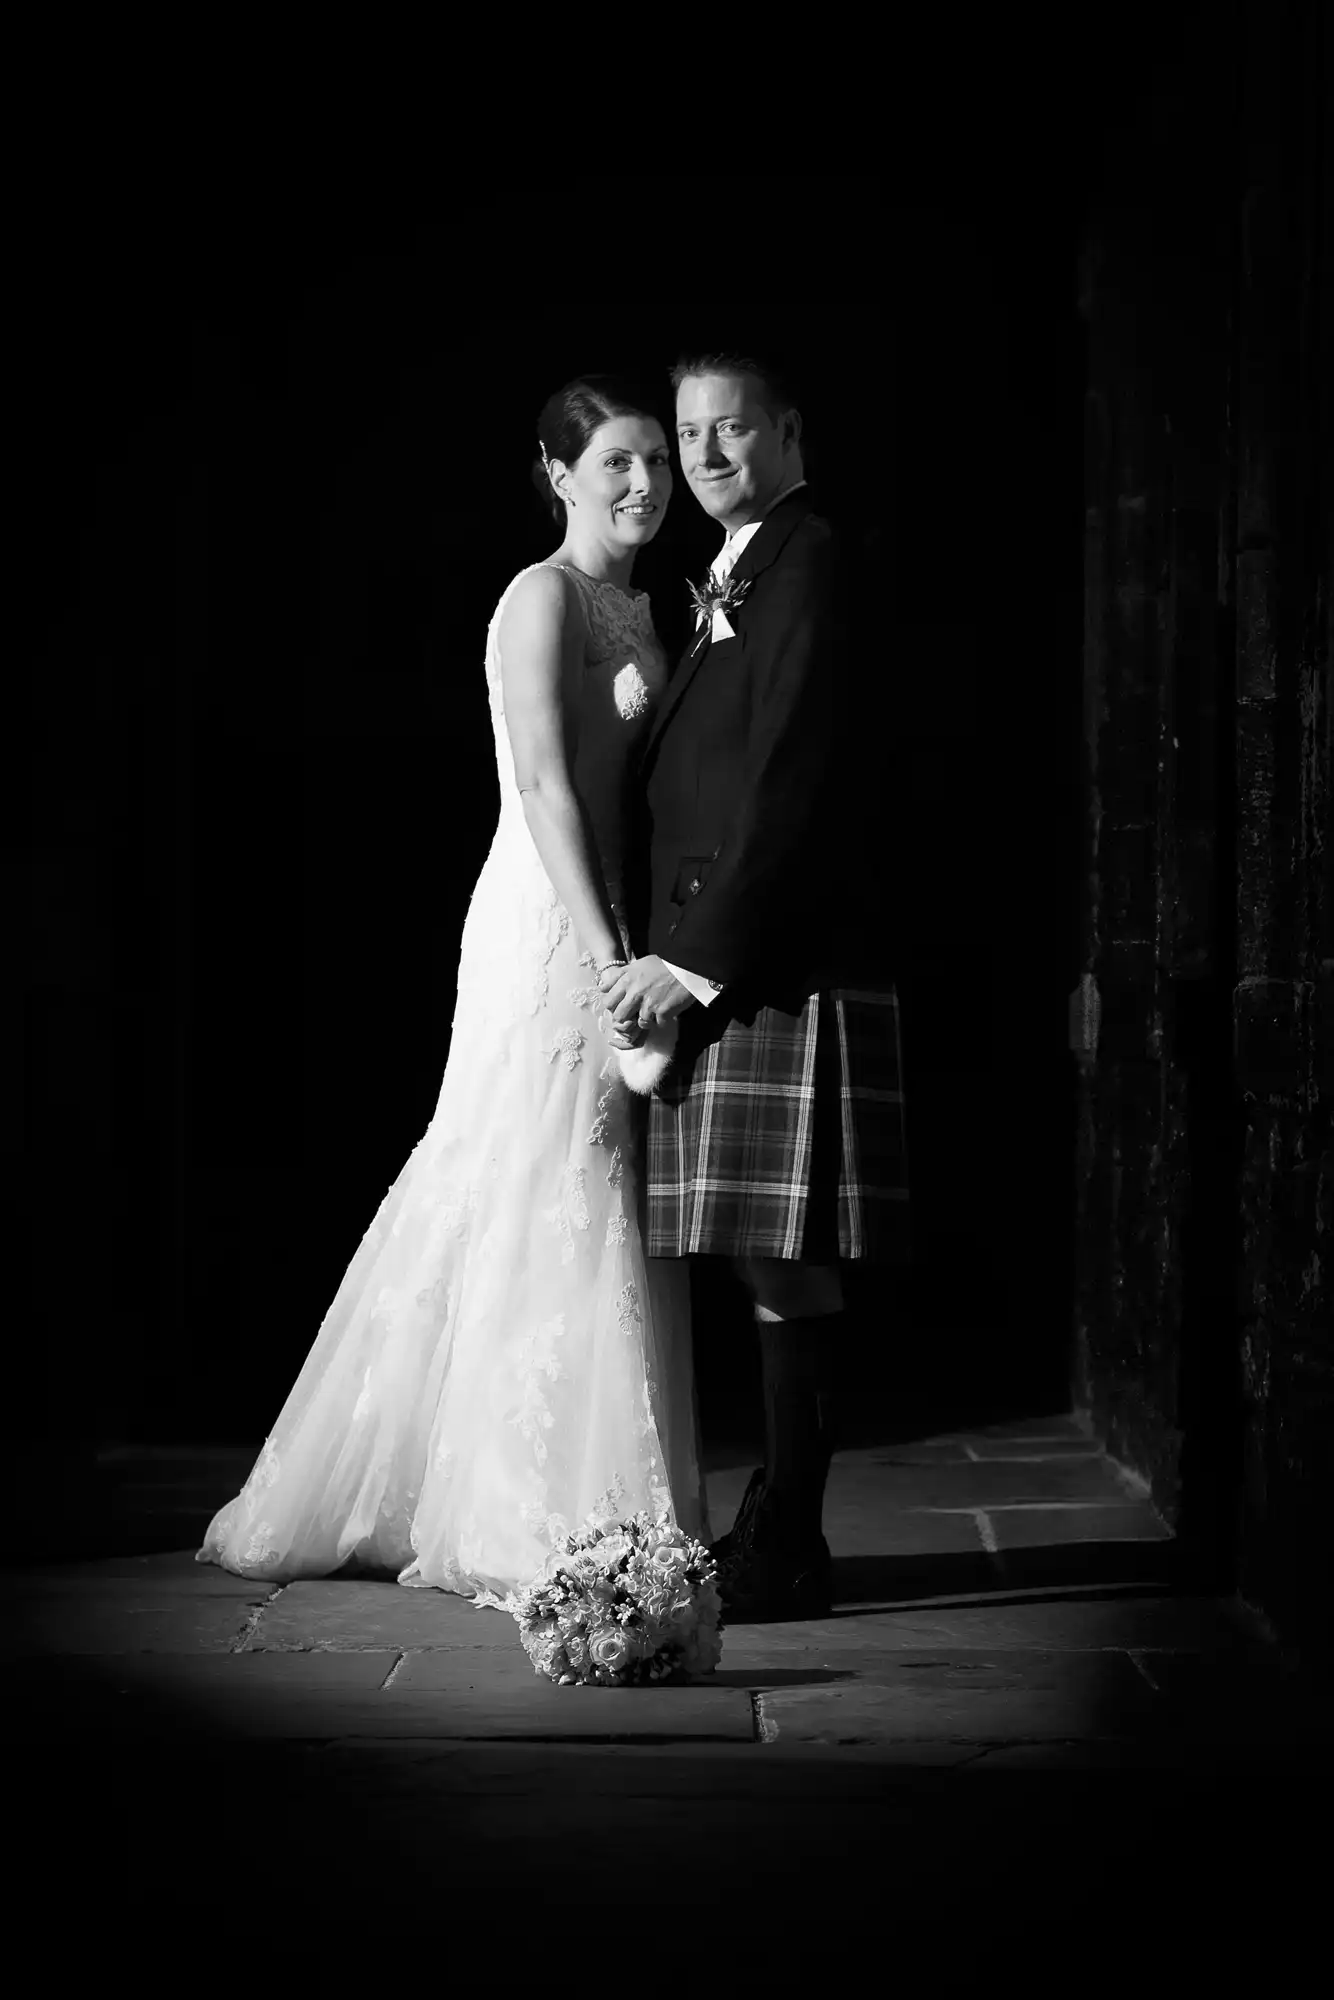 Bride in a white dress and groom in a kilt smiling together in a dimly lit setting with a bouquet on the ground.